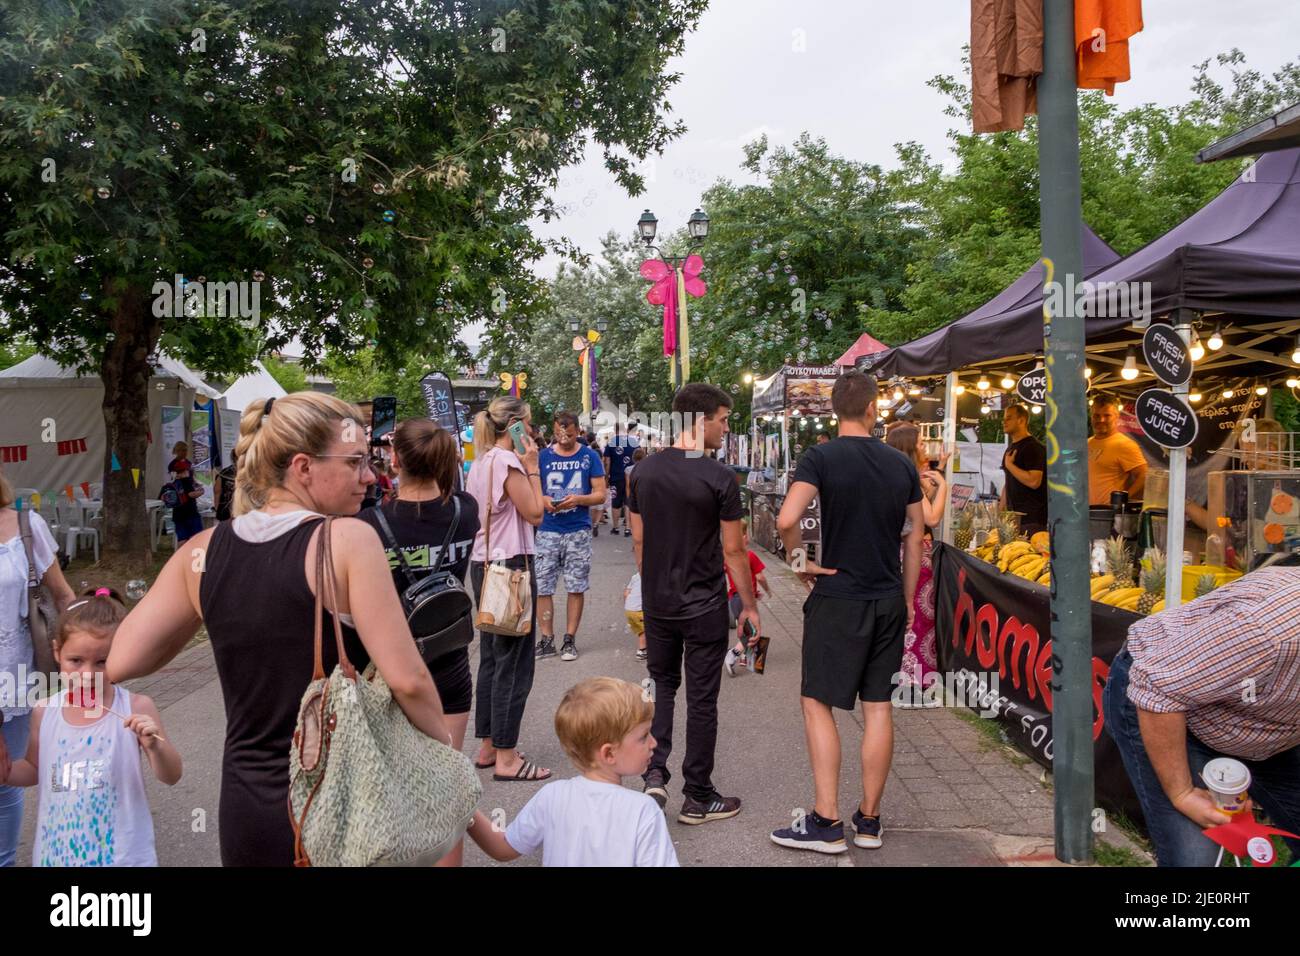 People walking on the sidewalk and buying from the food stands during a festival Stock Photo